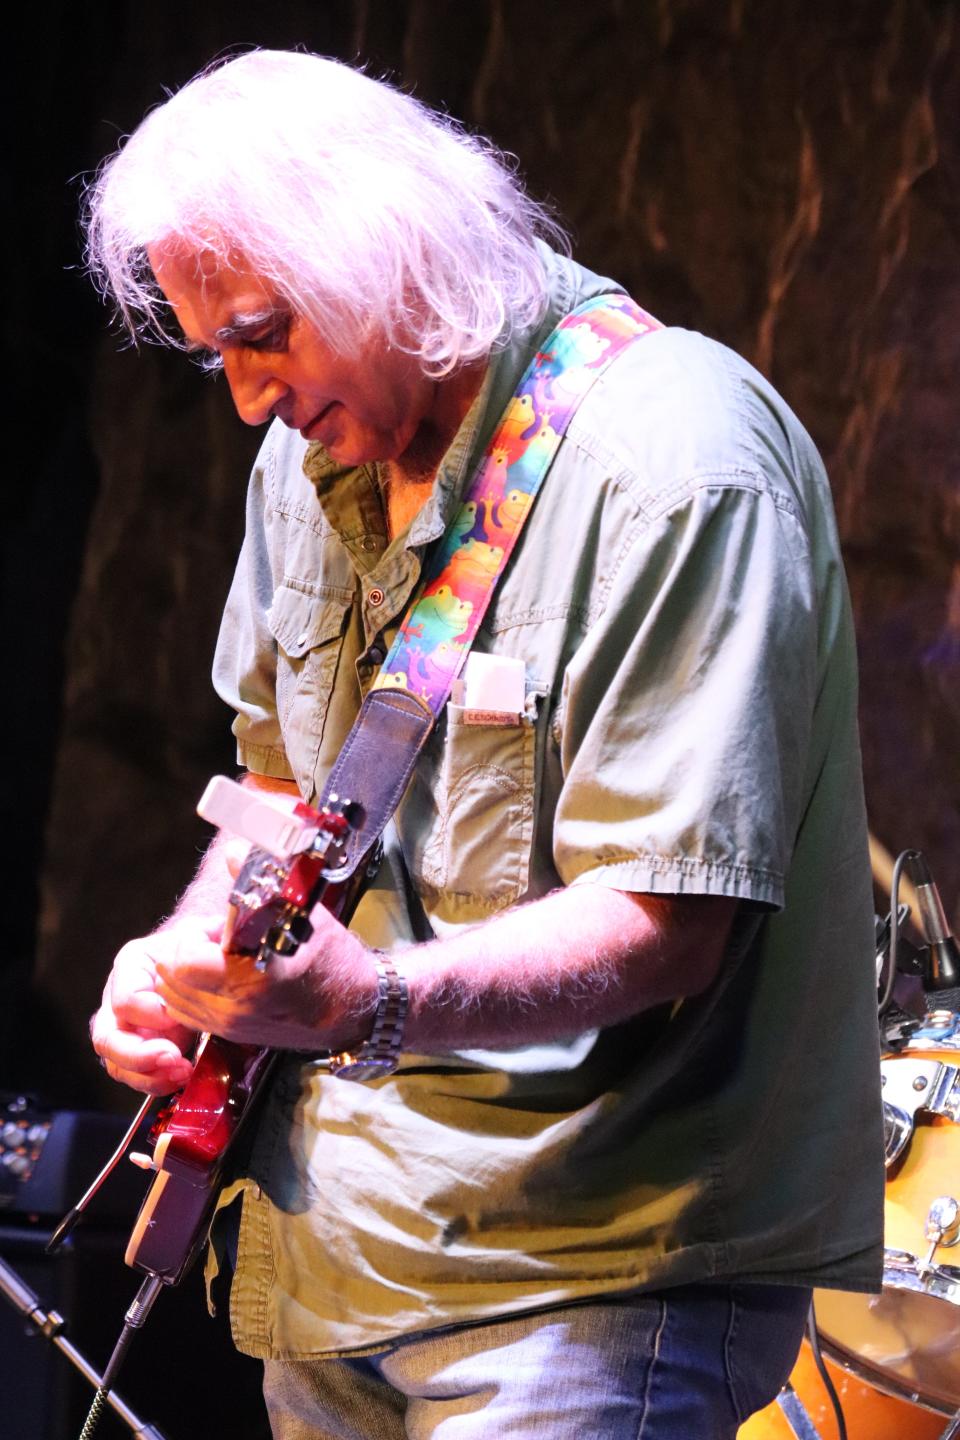 New Jersey native guitarist John Zias started the first Grateful Dead cover band, Cavalry, in 1969. He now plays in the Florida-based Dead tribute Unlimited Devotion.